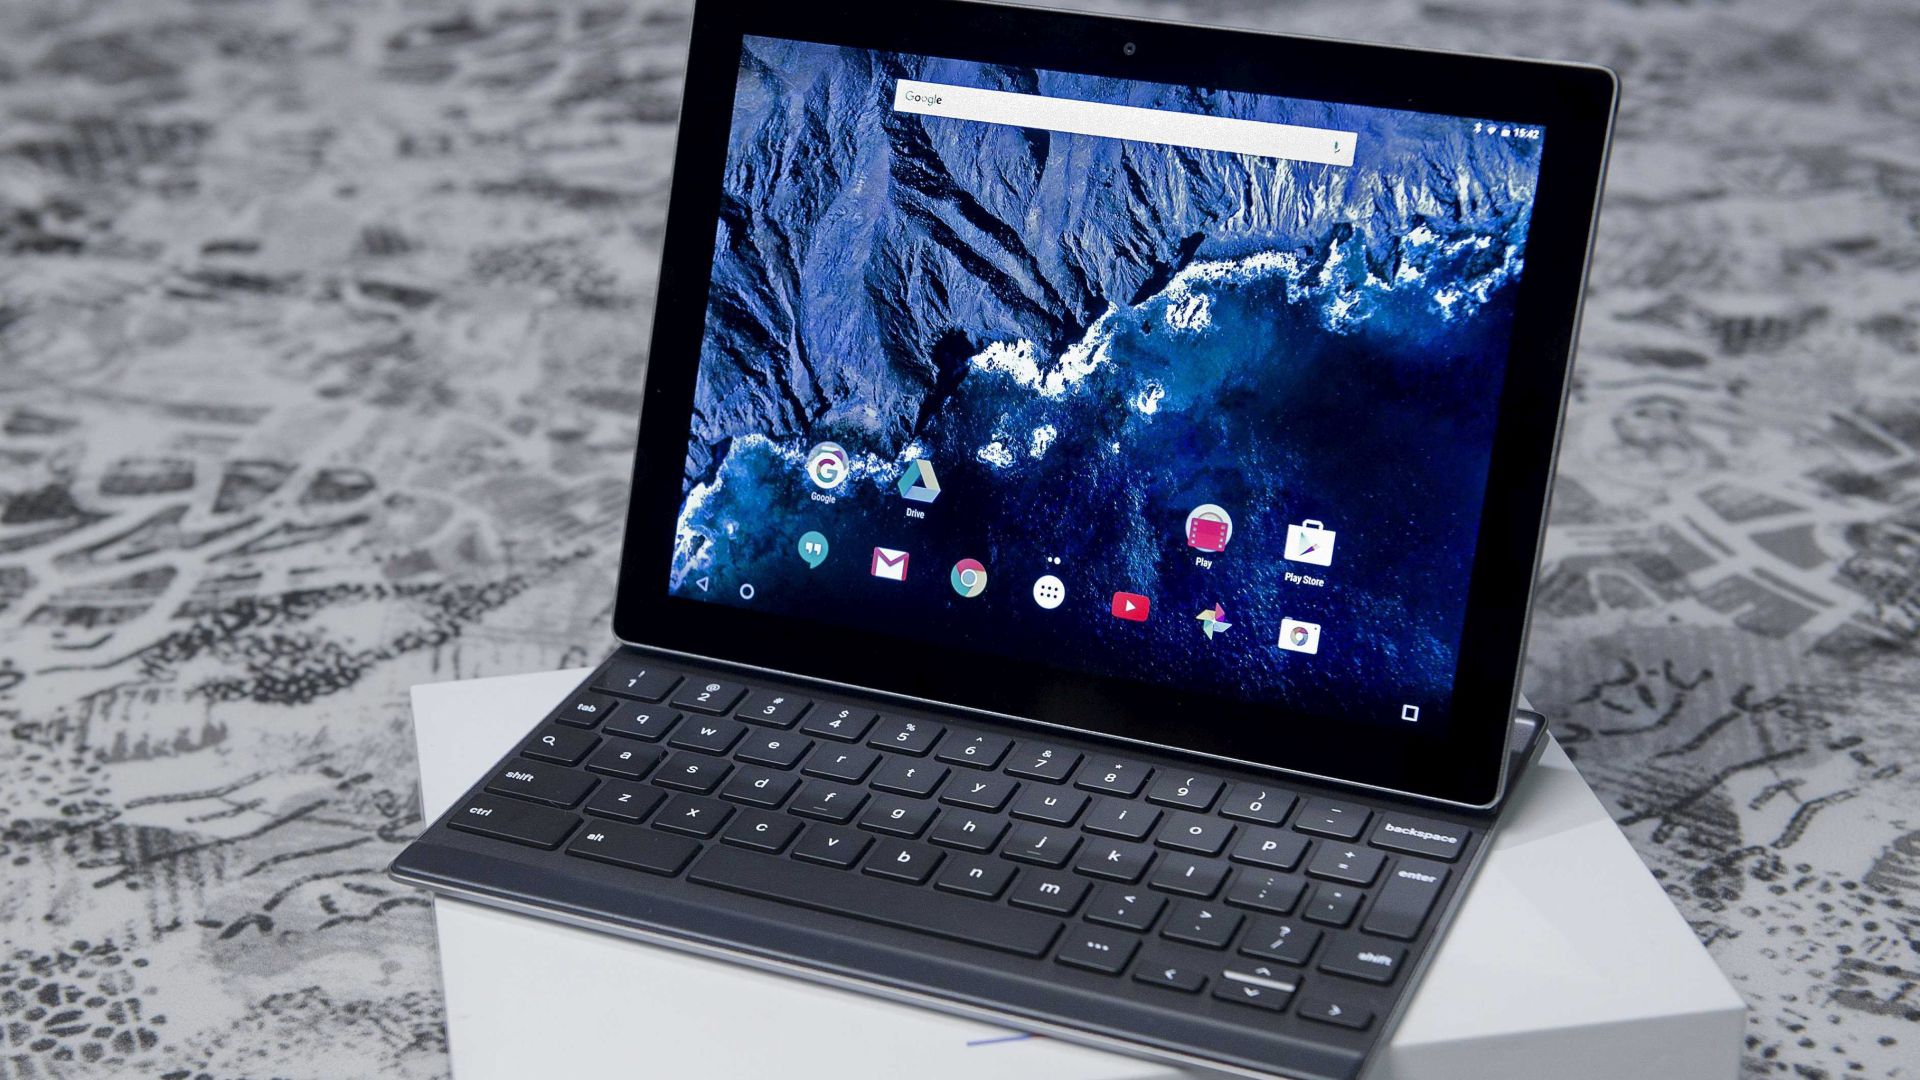 epa05060247 The new Pixel C tablet, introduced by Google, is seen in Amsterdam, The Netherlands, 08 December 2015. The new tablet that features a 10 inch display uses Android 6 operating system and can be used with an optional keyboard. Pixel C is available in two versions, with 32GB storage for 499 USD or 64GB storage memory for 599 USD. The keyboard will cost an additional 149 USD.  EPA/EVERT ELZINGA